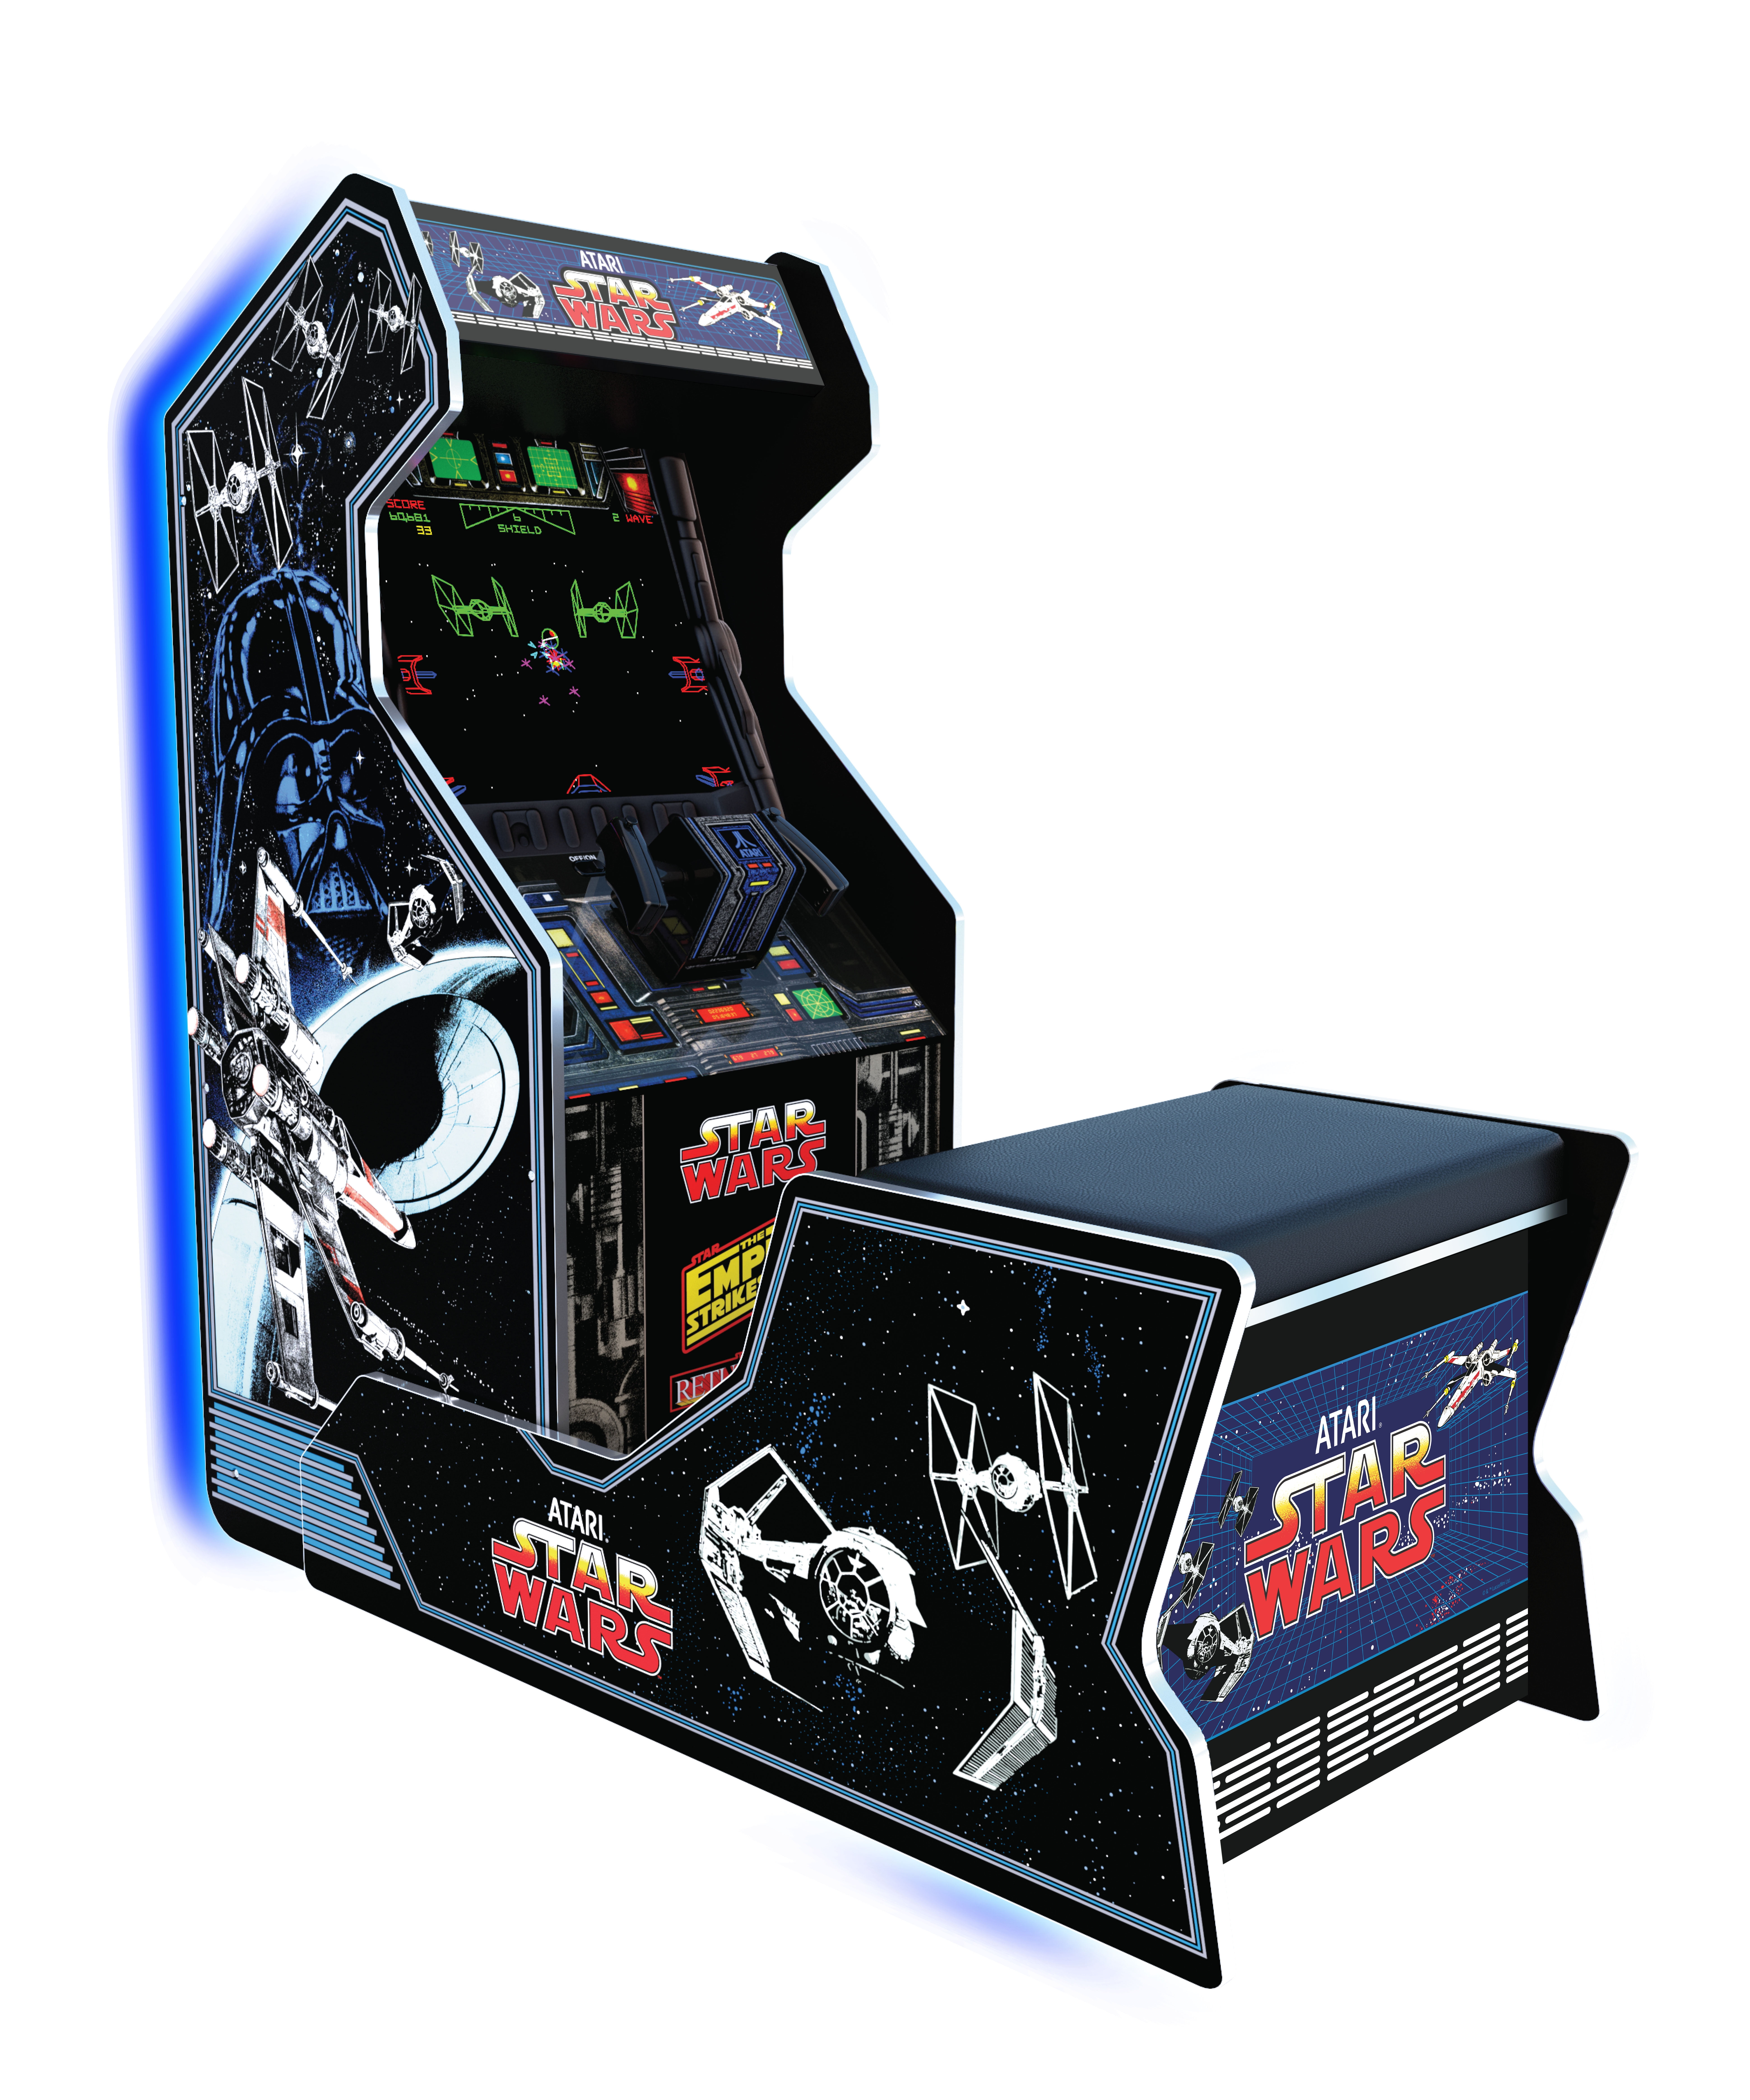 Classic Star Wars Full Color Commercial Video Arcade Machine Game W/ Bench Seat 